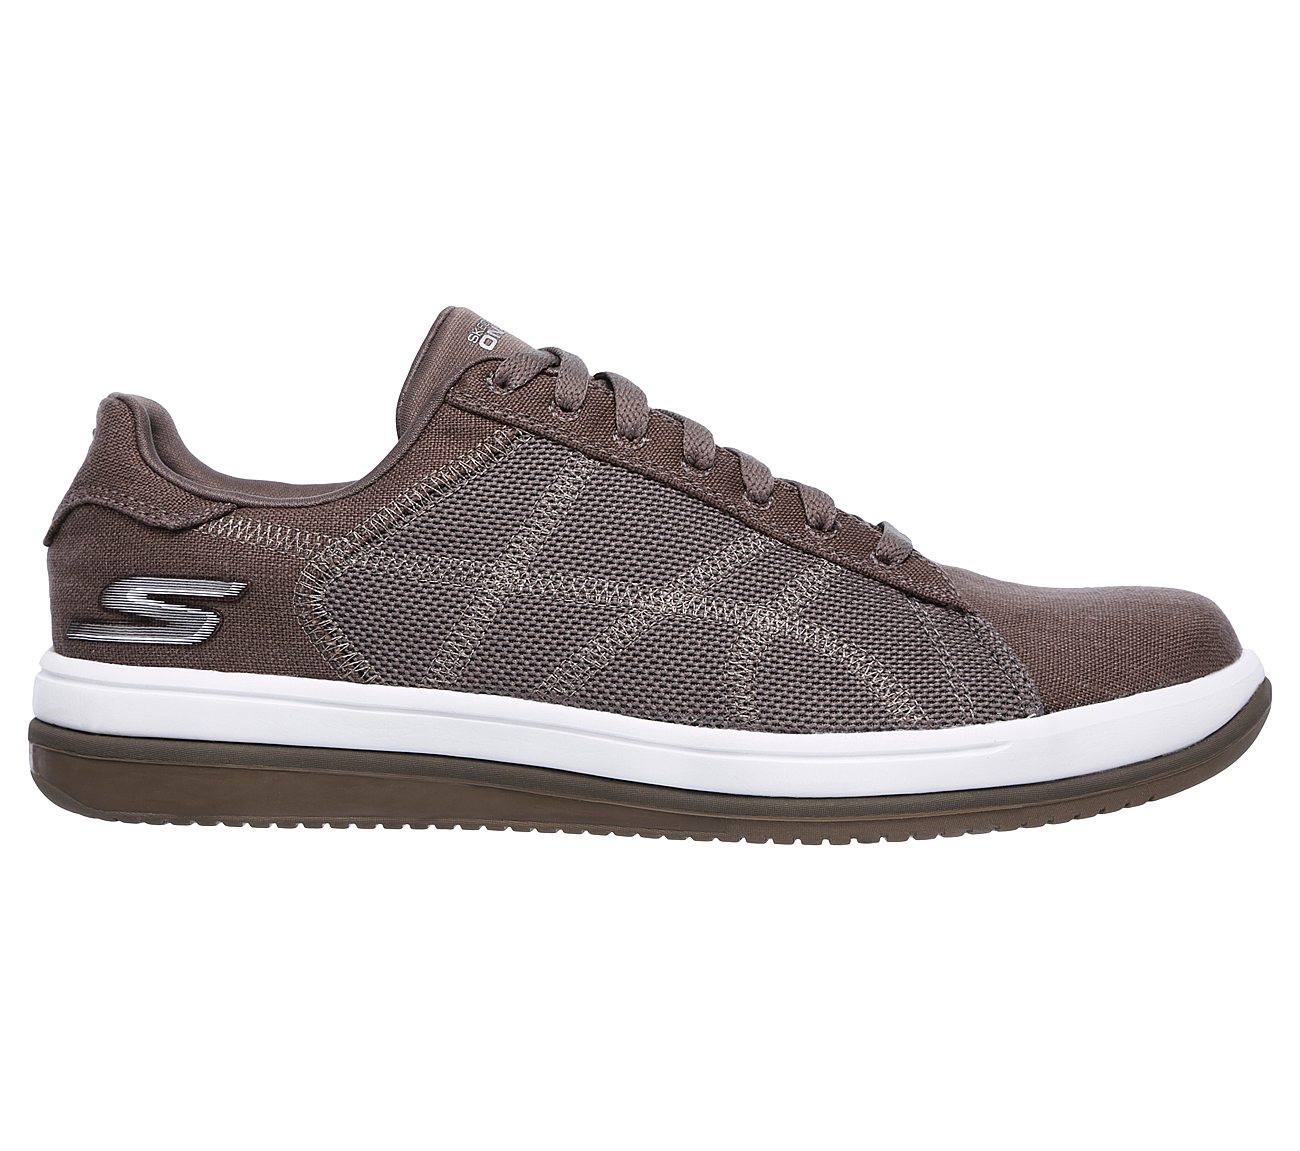 Revolve Skechers On the GO Shoes